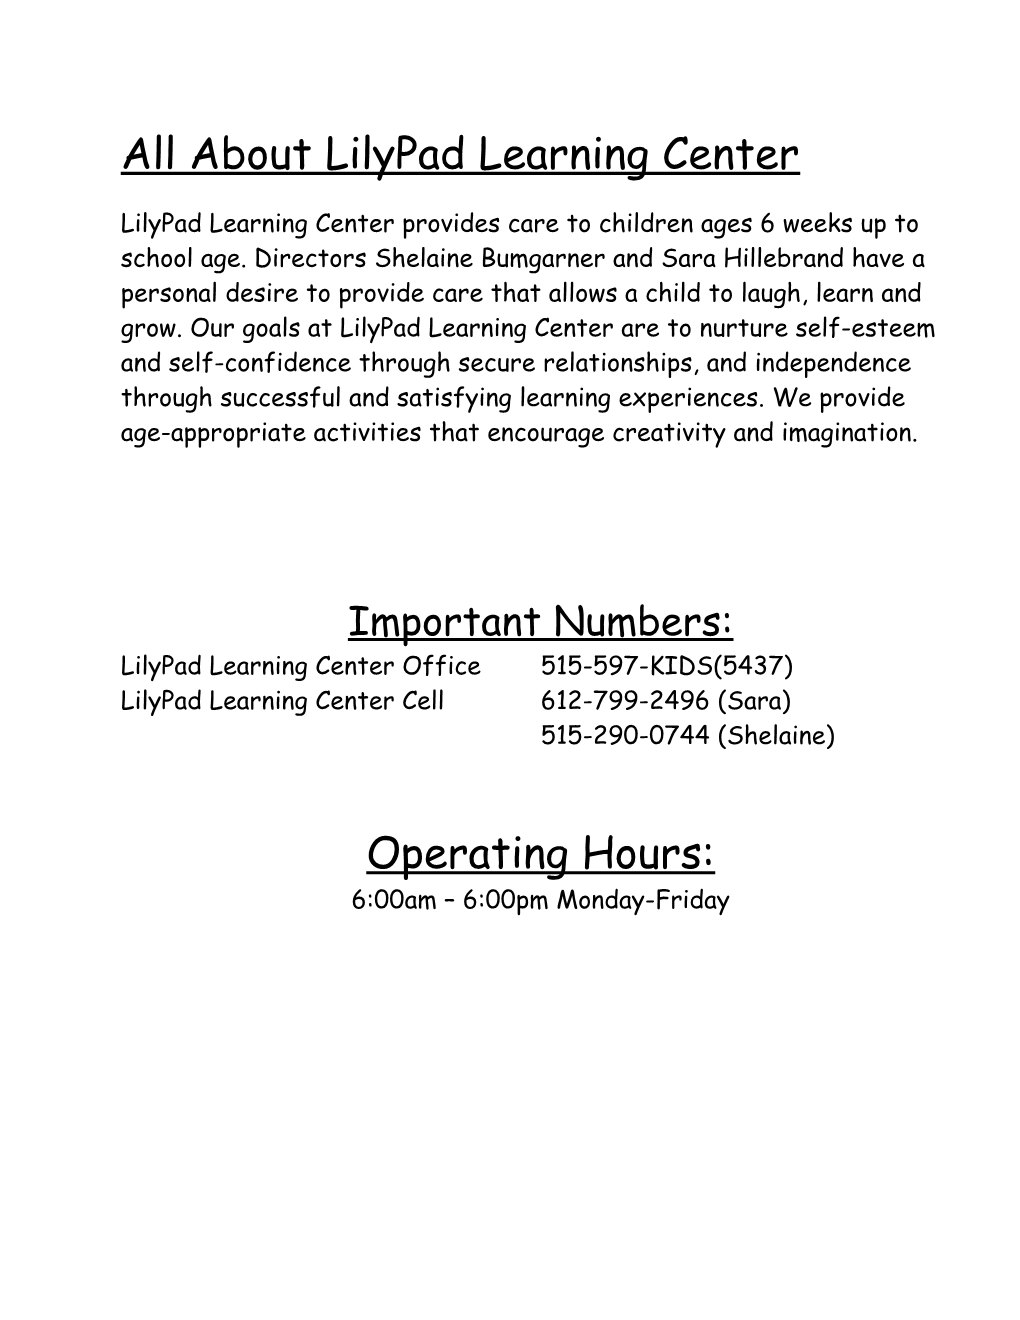 All About Lilypad Learning Center